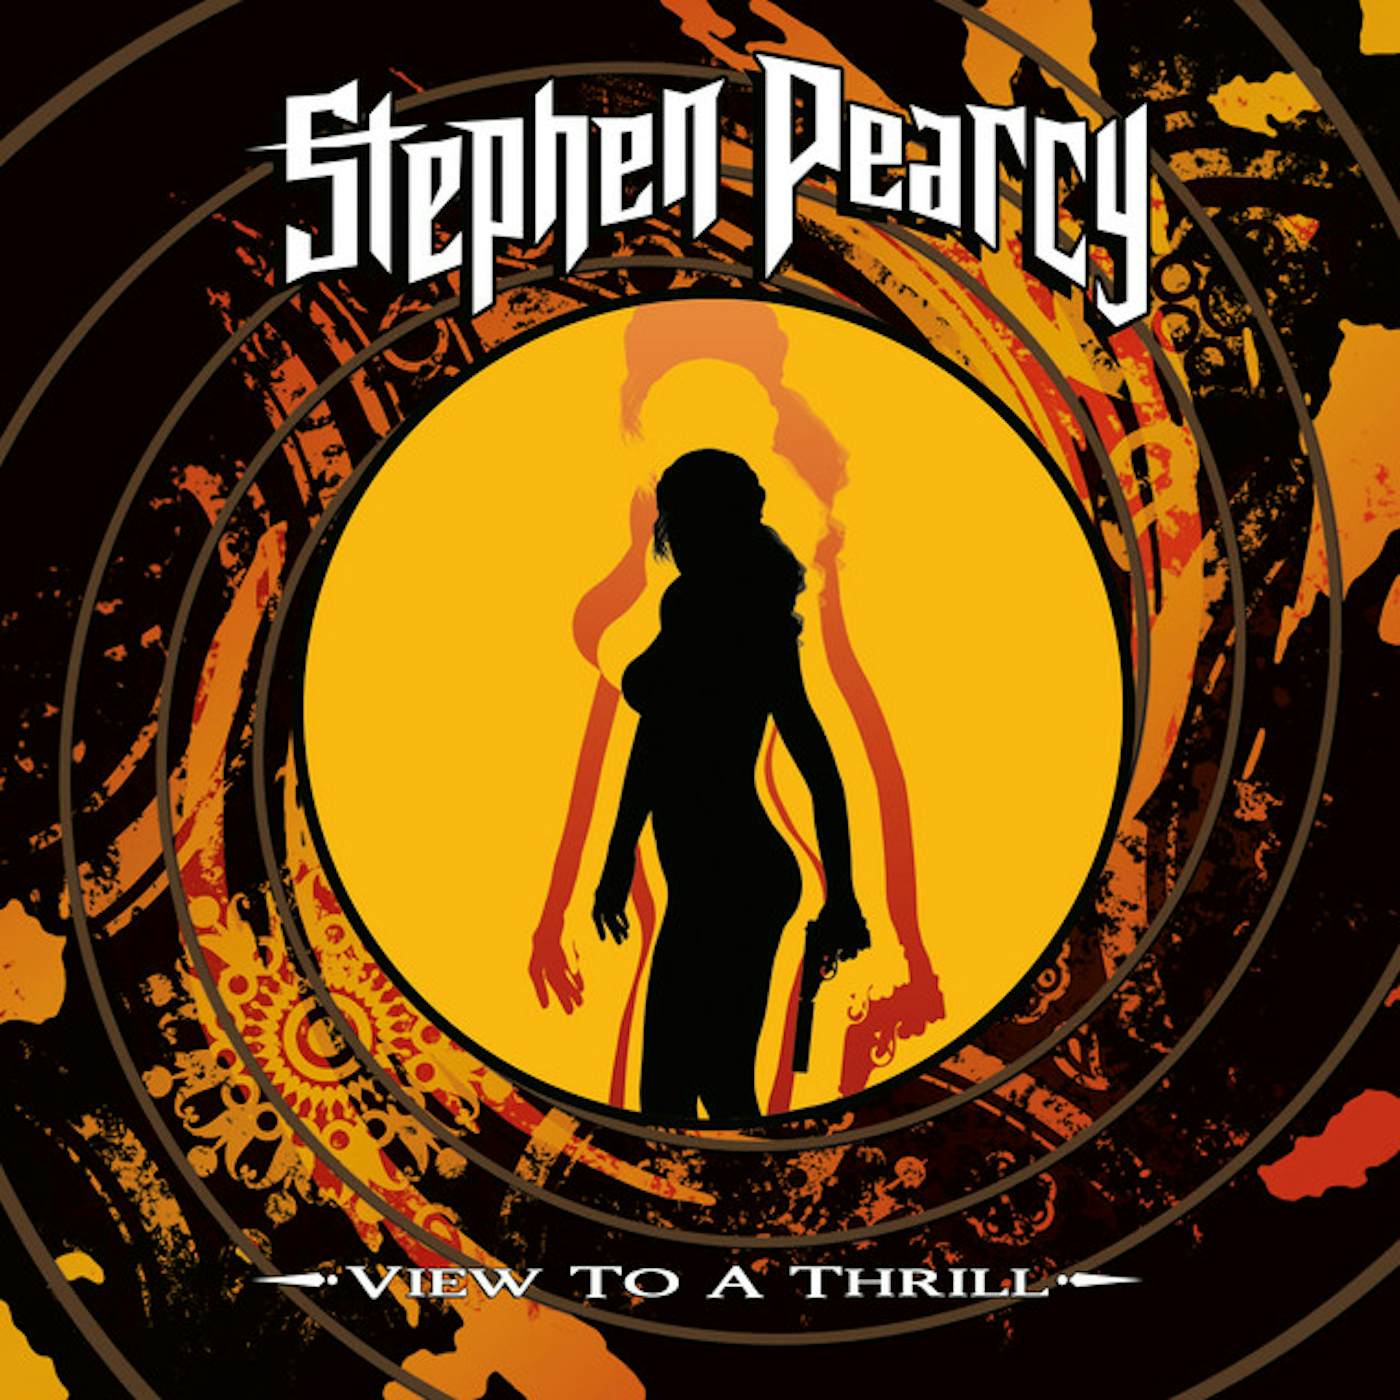 Stephen Pearcy View to a Thrill Vinyl Record